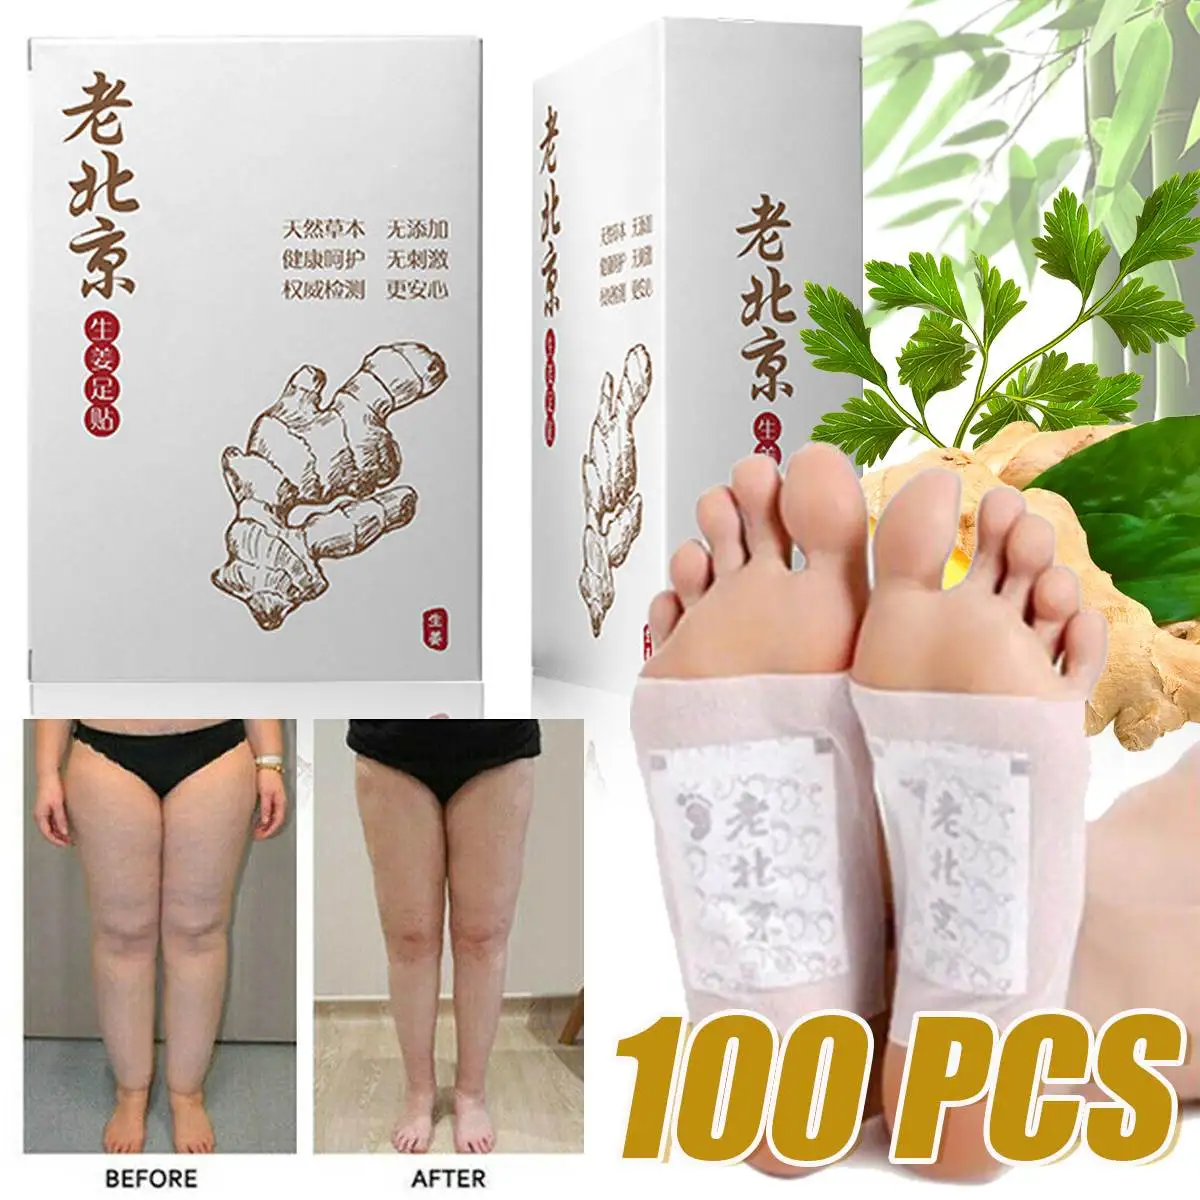 

100 Pcs Detox Loss Weight Foot Patch Improve Sleep Old Beijing Ginger Wormwood Foot Patch Anti-Swelling Revitalizing Health Care